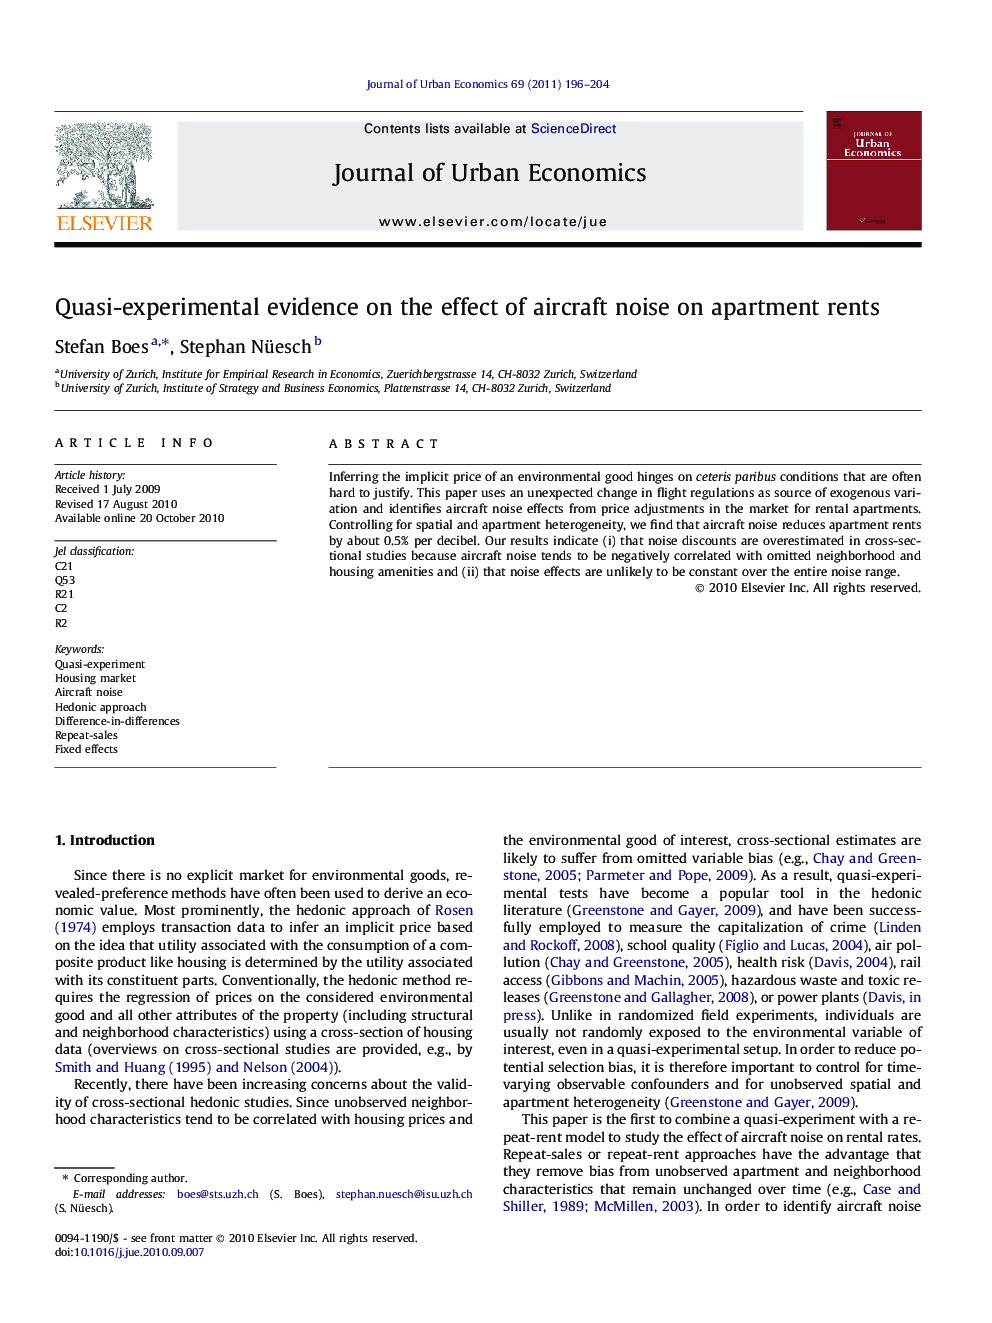 Quasi-experimental evidence on the effect of aircraft noise on apartment rents